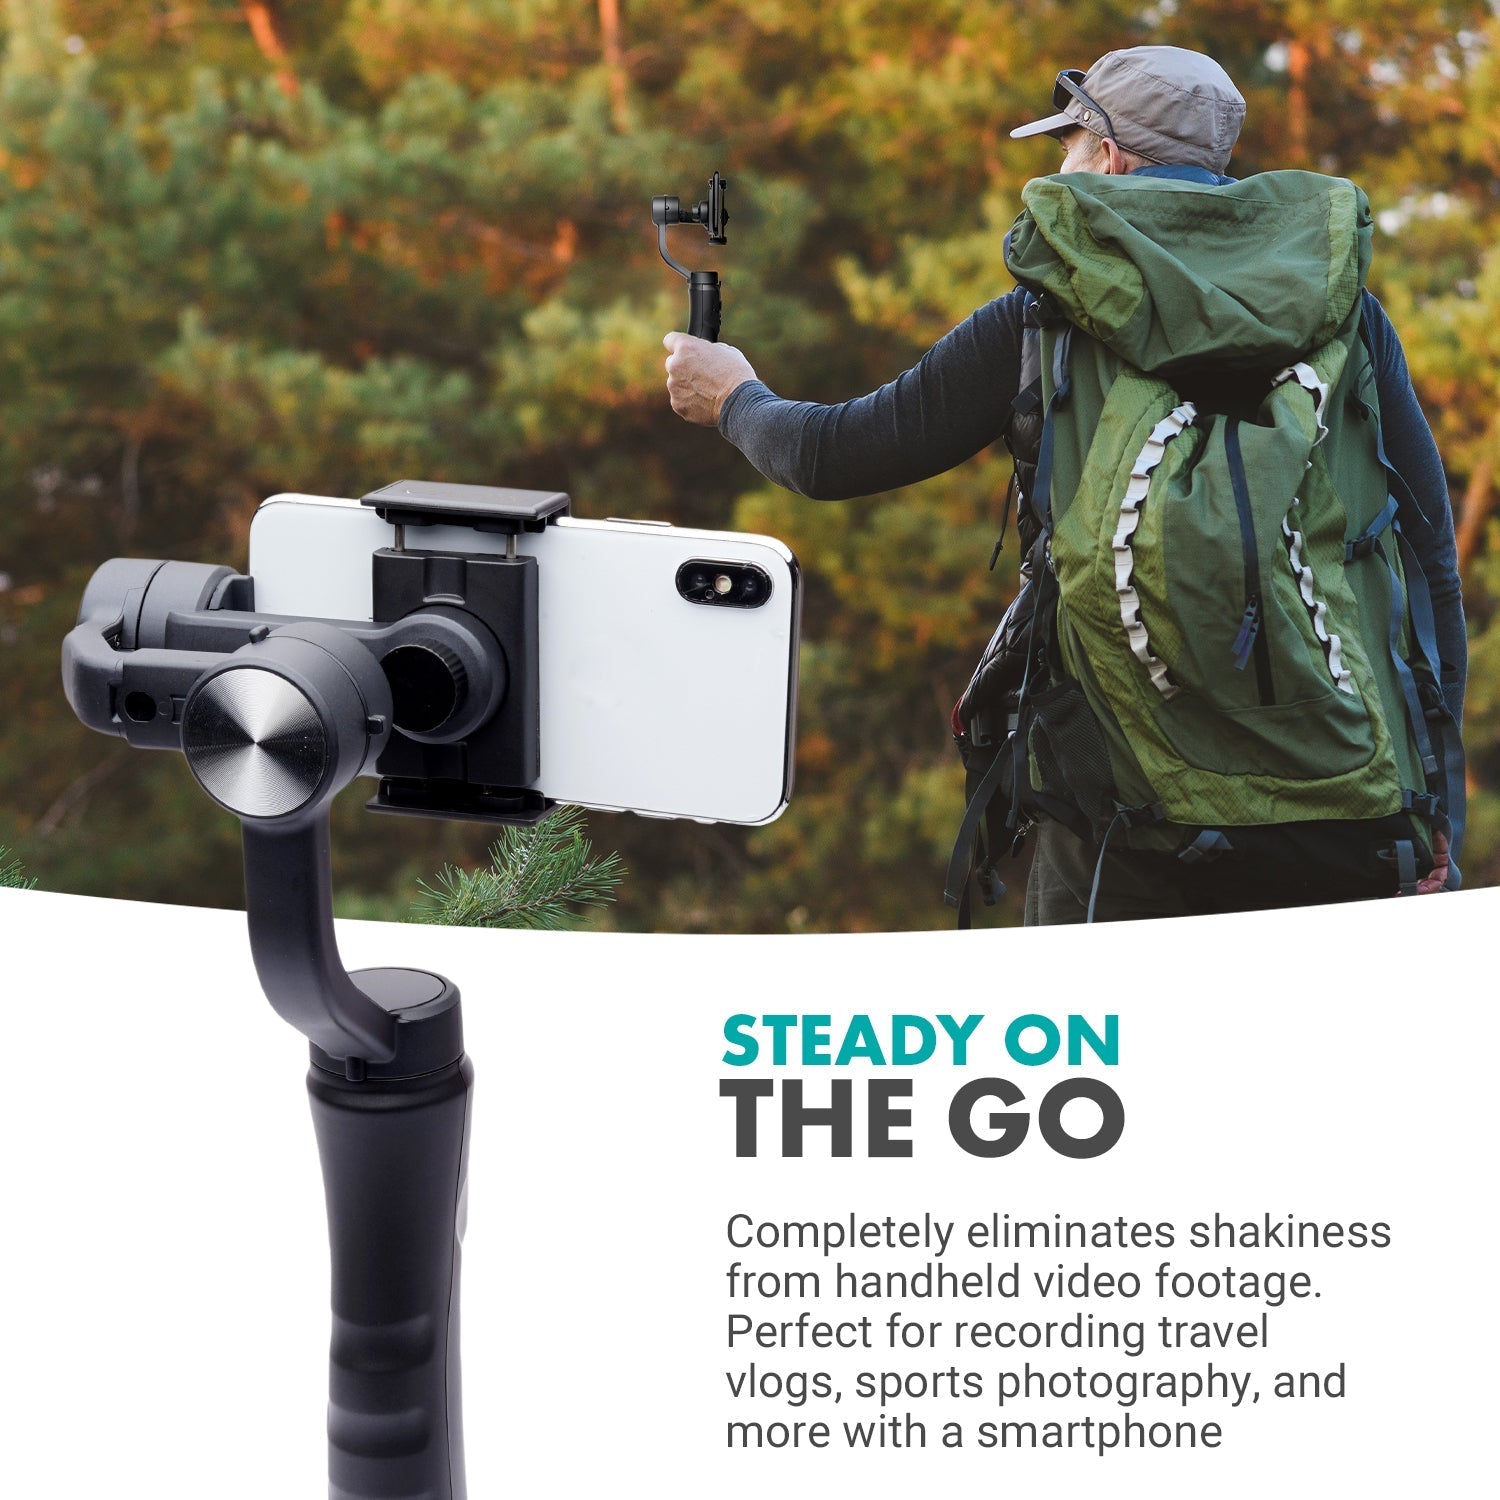 Motorized 3-Axis Handheld Gimbal Stabilizer for Smartphones - Movo